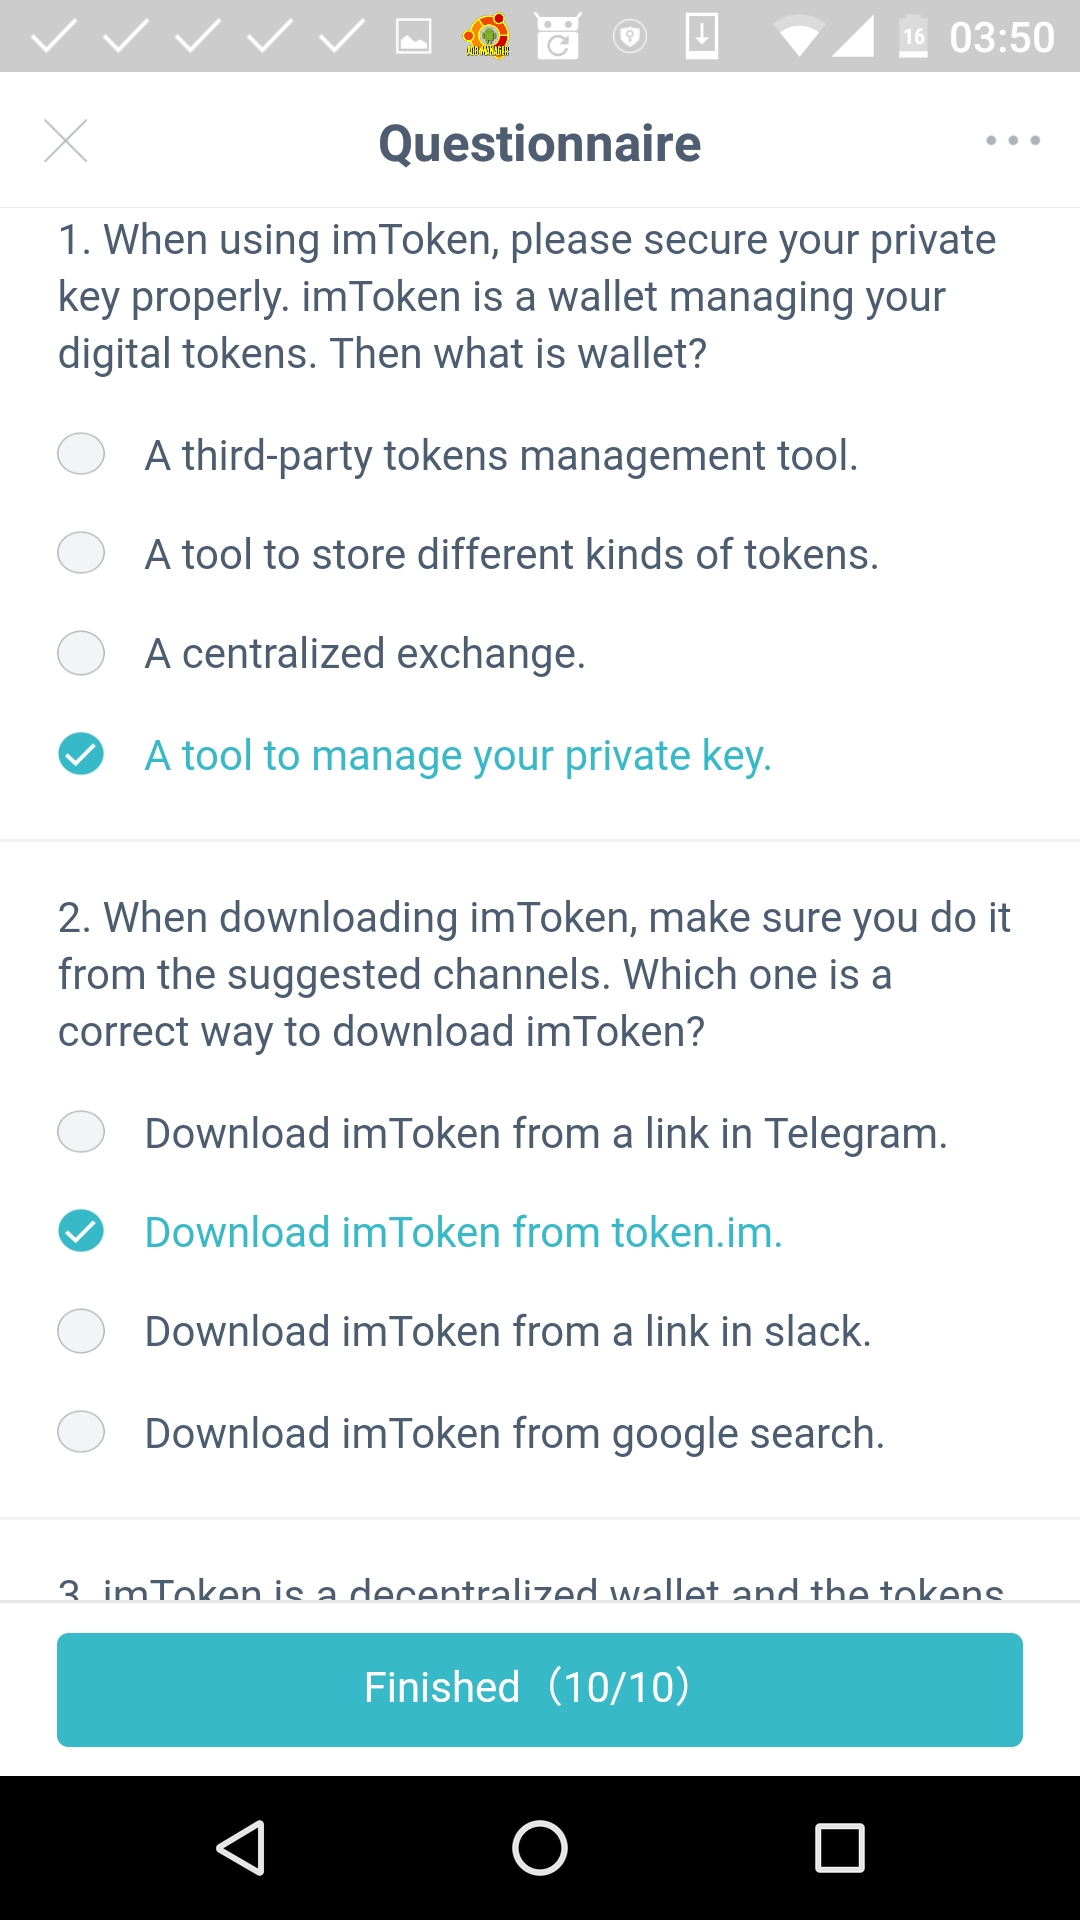 1. A tool to manage your private key 2. Download imToken from token.im.